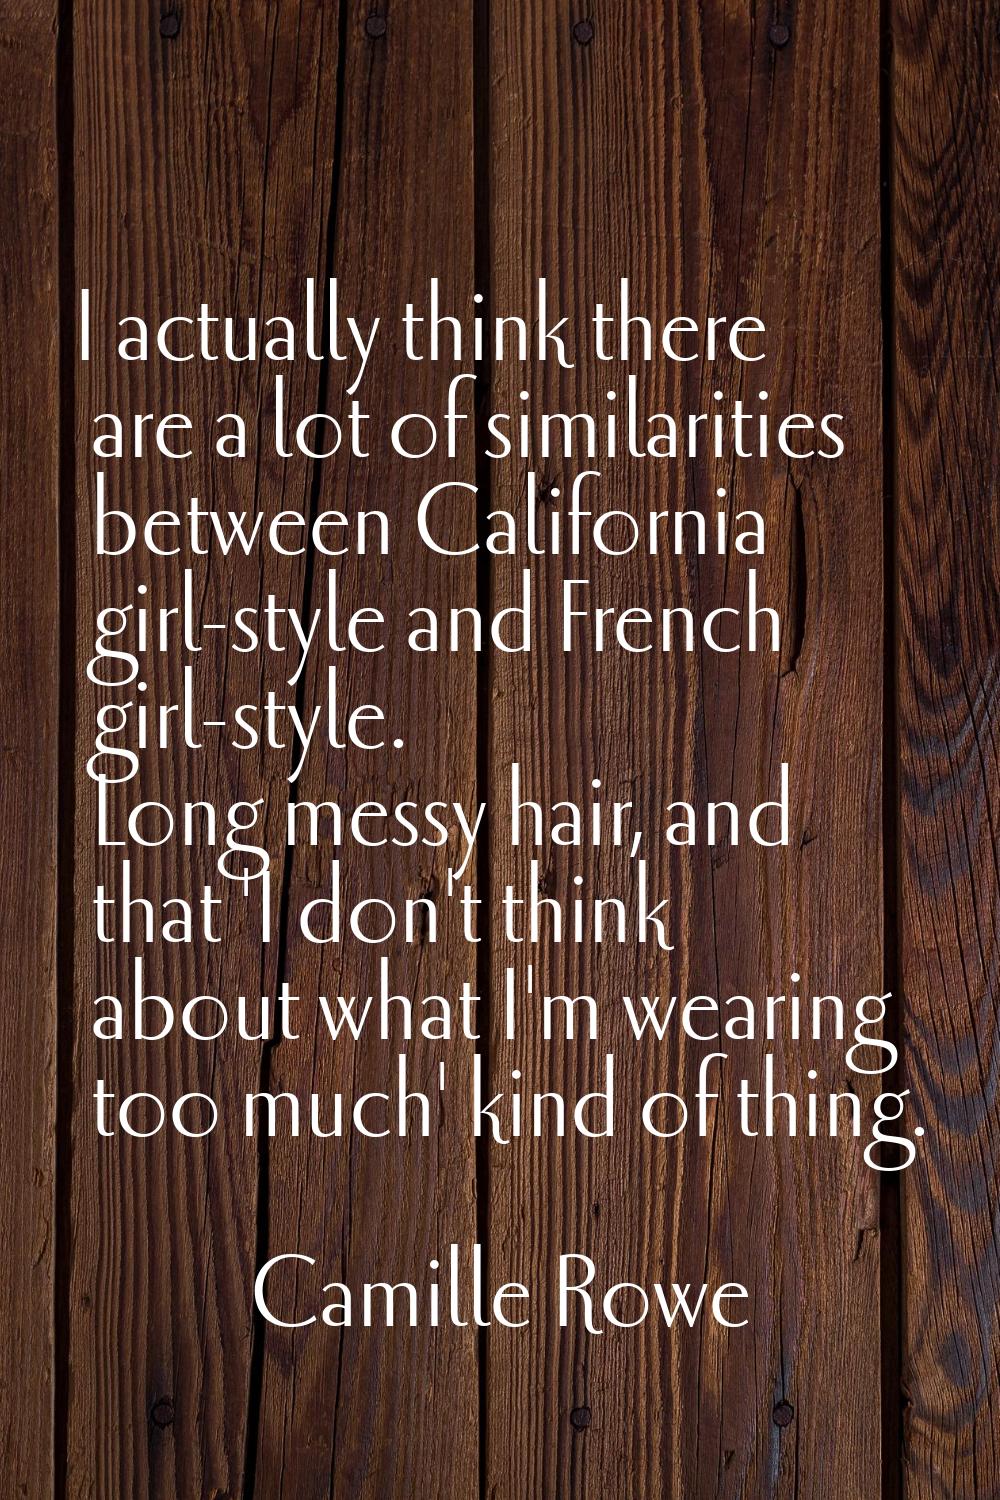 I actually think there are a lot of similarities between California girl-style and French girl-styl